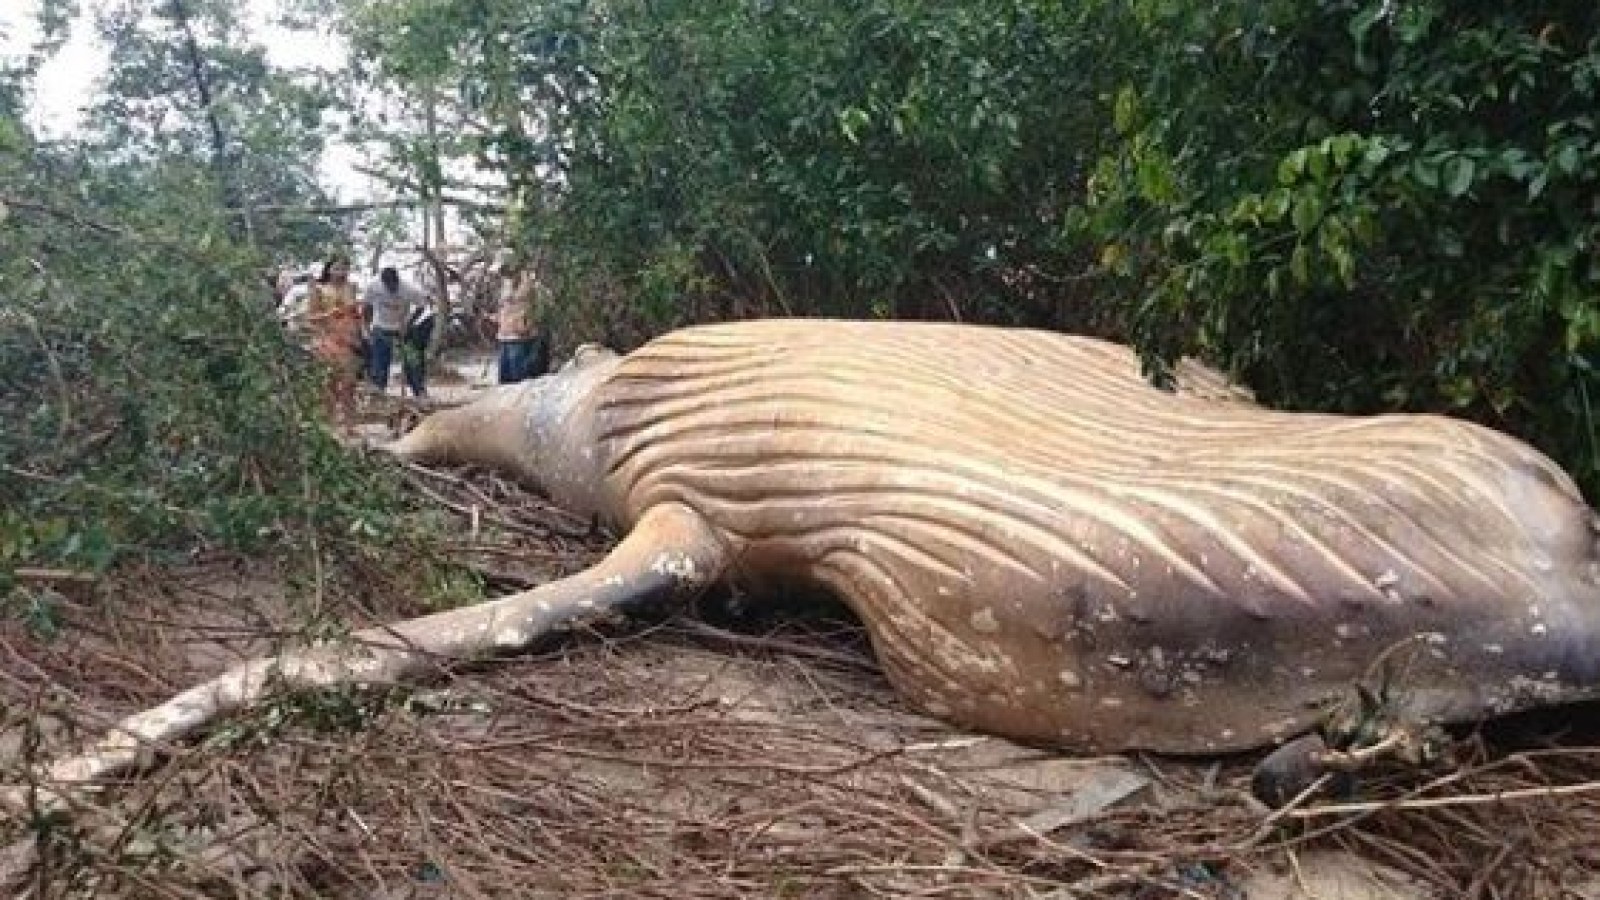 Humpback Whale Discovered in Amazon Jungle in Wildlife Mystery That Has  Scientists Baffled ﻿